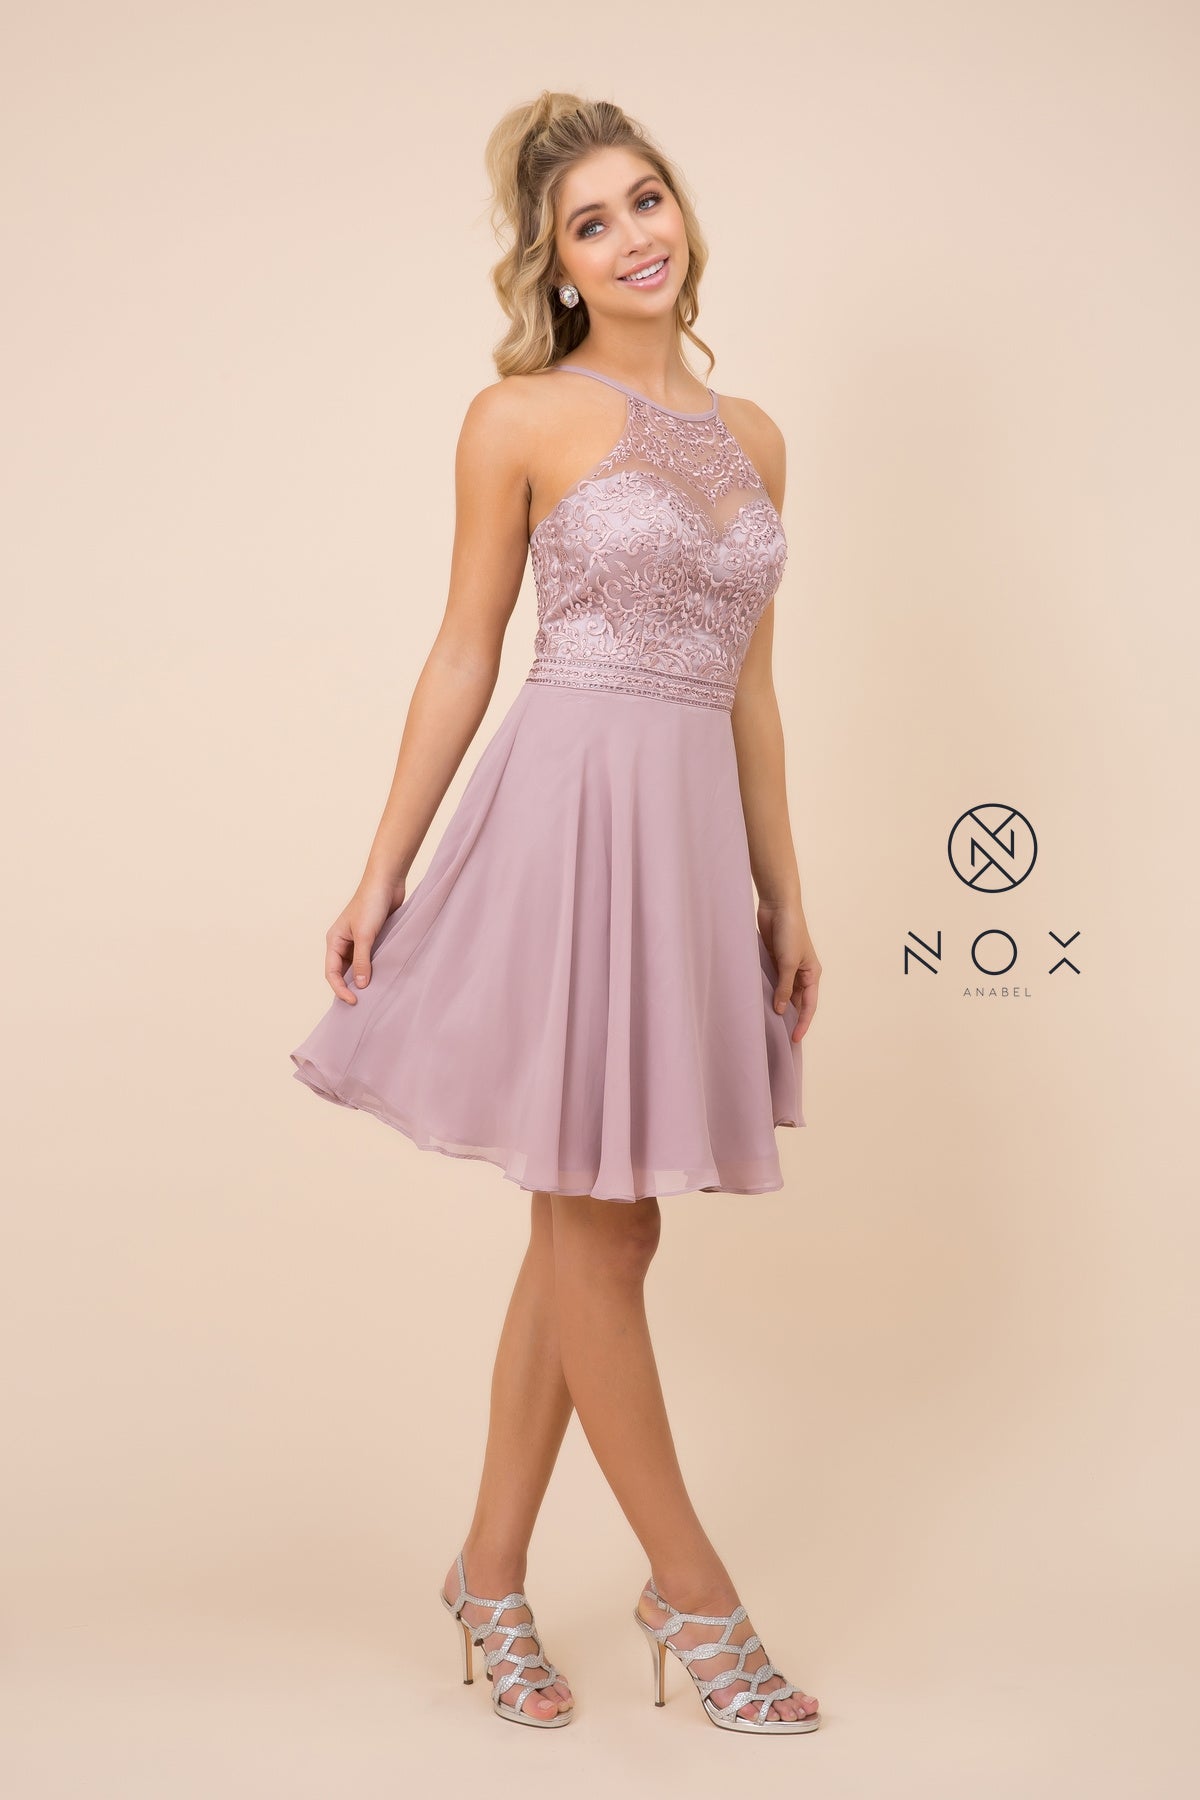 MyFashion.com - EMBELLISHED ILLUSION HALTER CHIFFON A-LINE HOME COMING DRESS (Y629) - Nox Anabel promdress eveningdress fashion partydress weddingdress 
 gown homecoming promgown weddinggown 